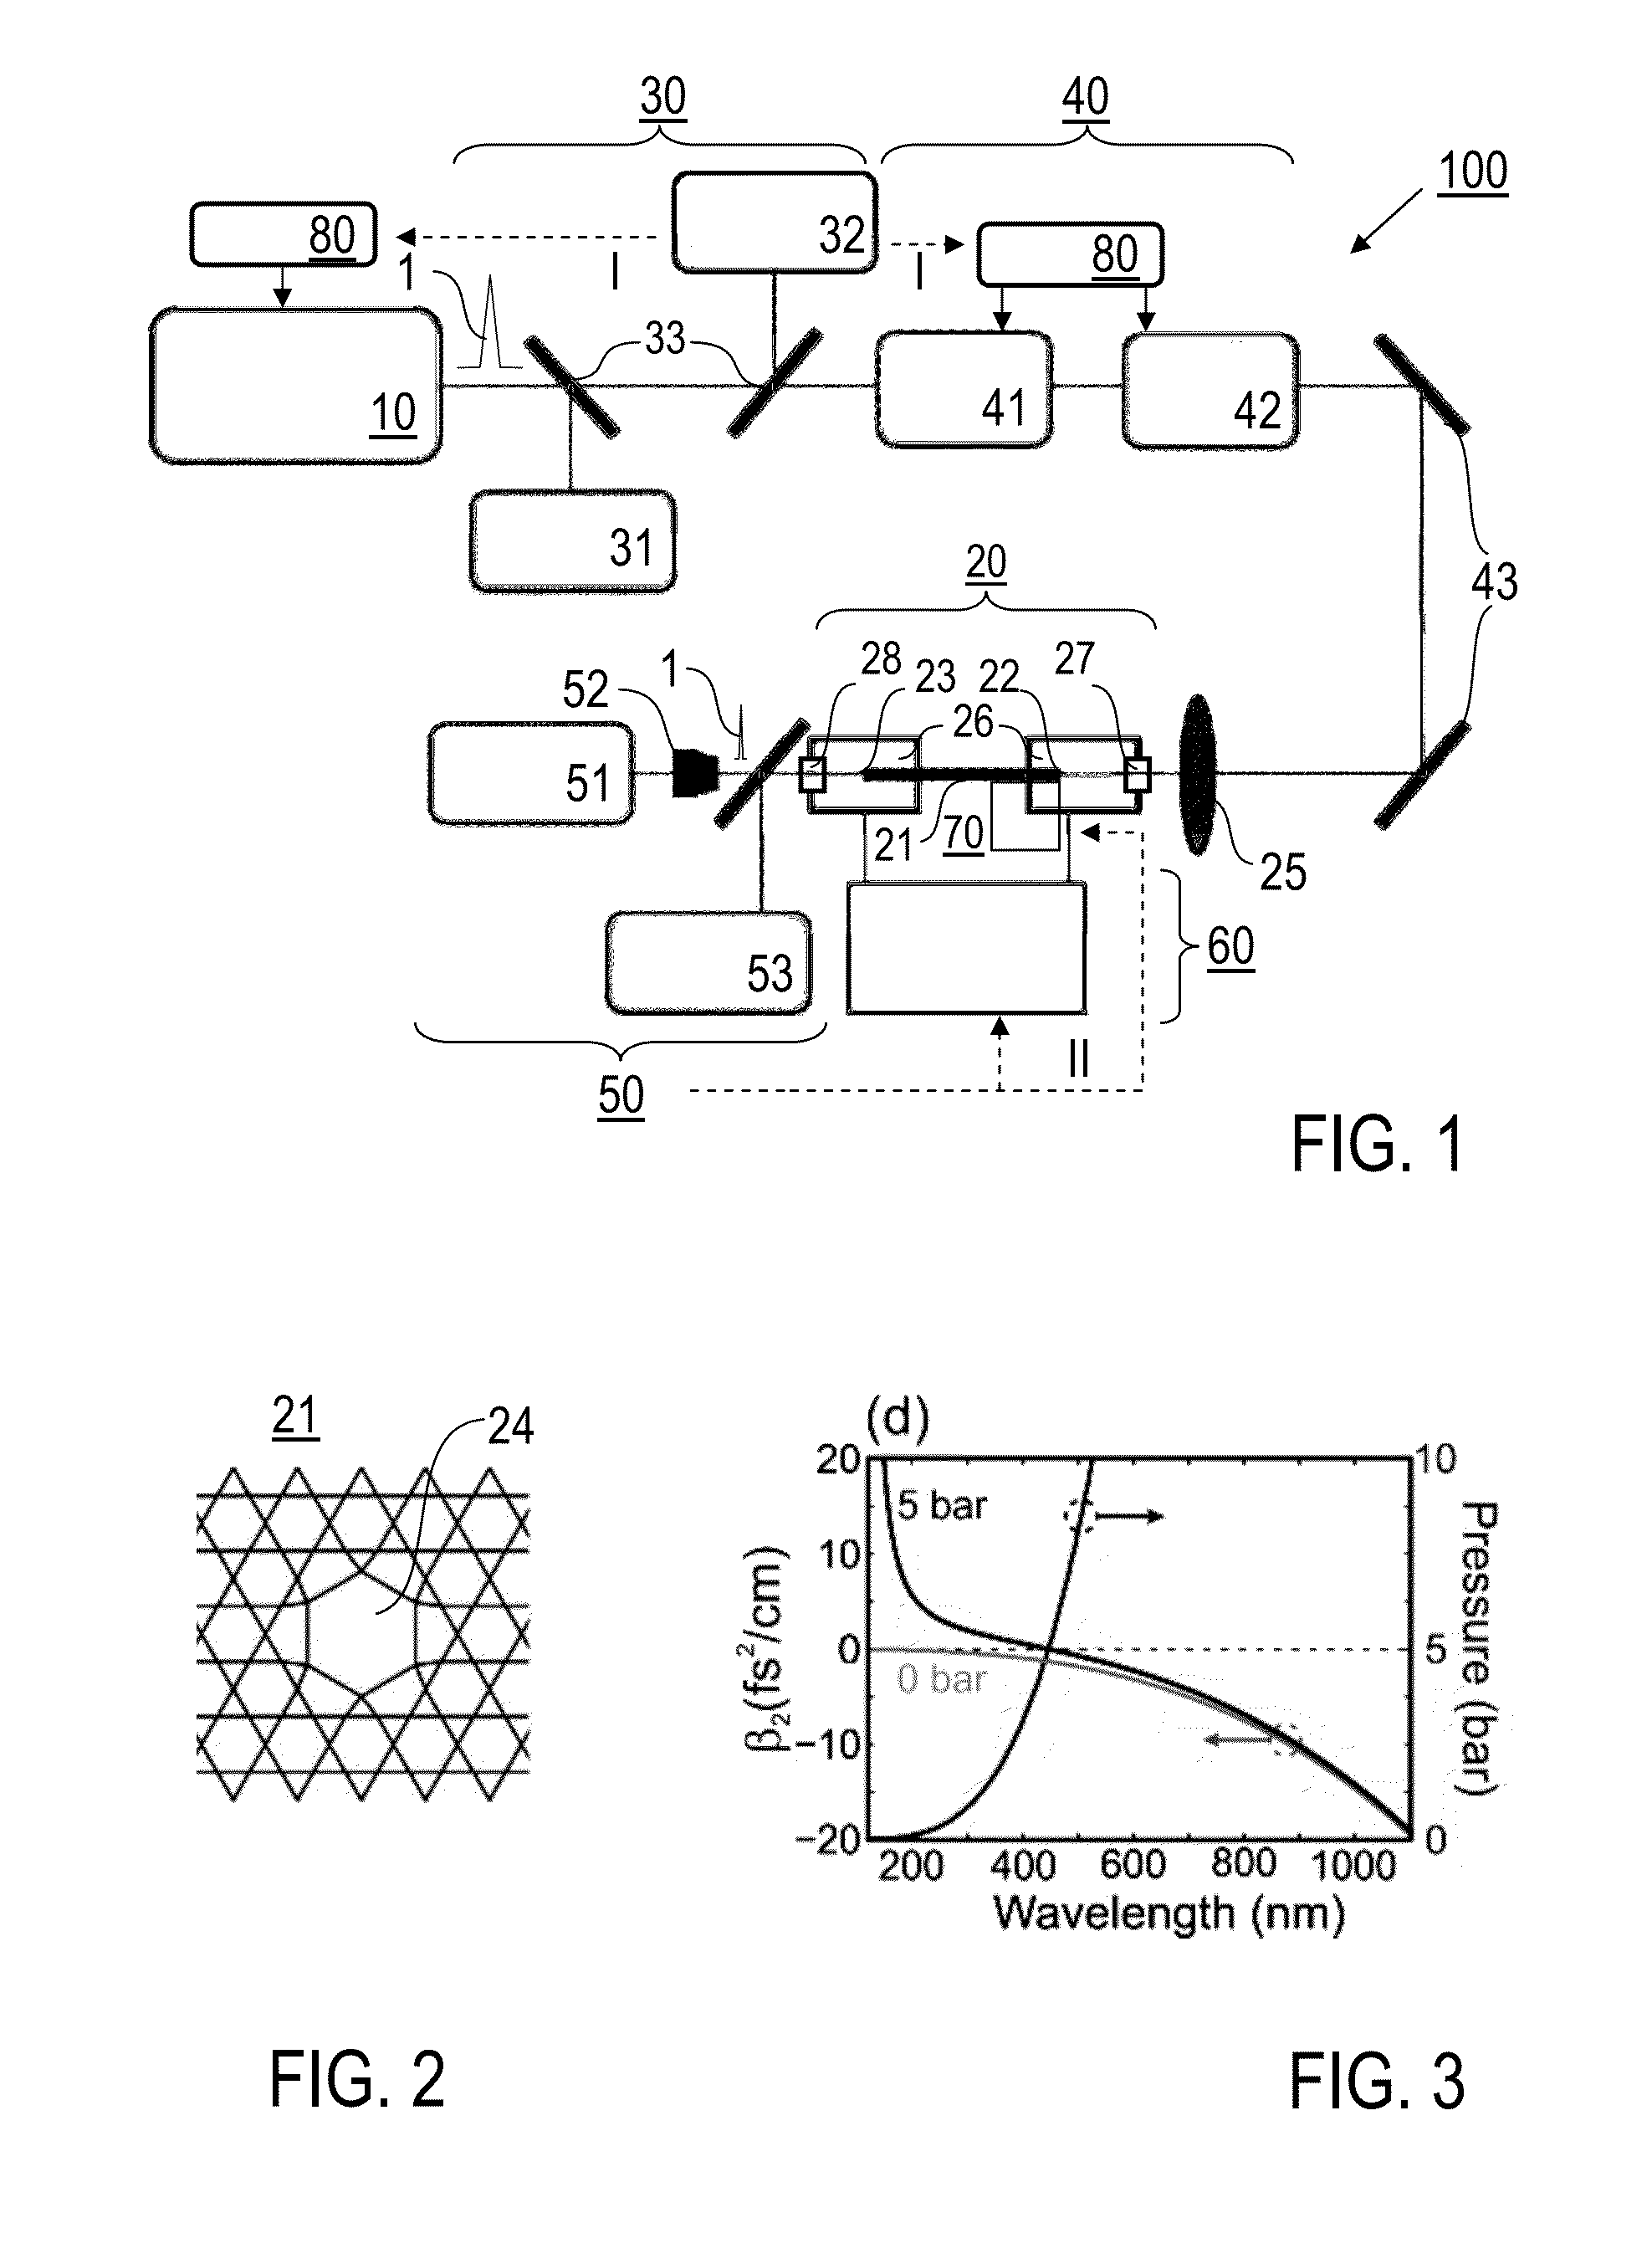 Method and device for creating supercontinuum light pulses